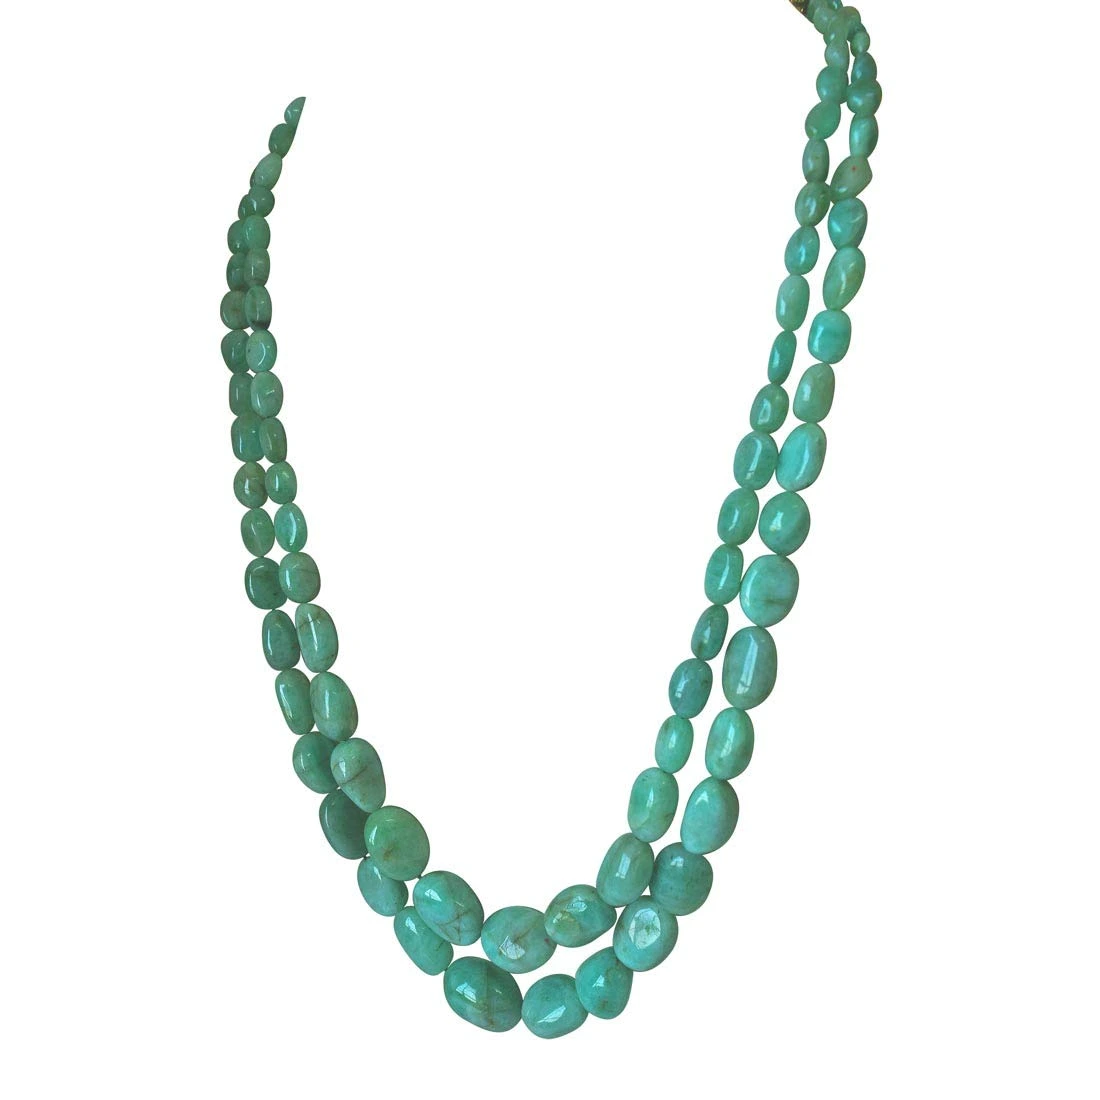 Two Line 370.76cts REAL Natural Light Green Oval Emerald Necklace for Women (370.76cts EMR Neck)